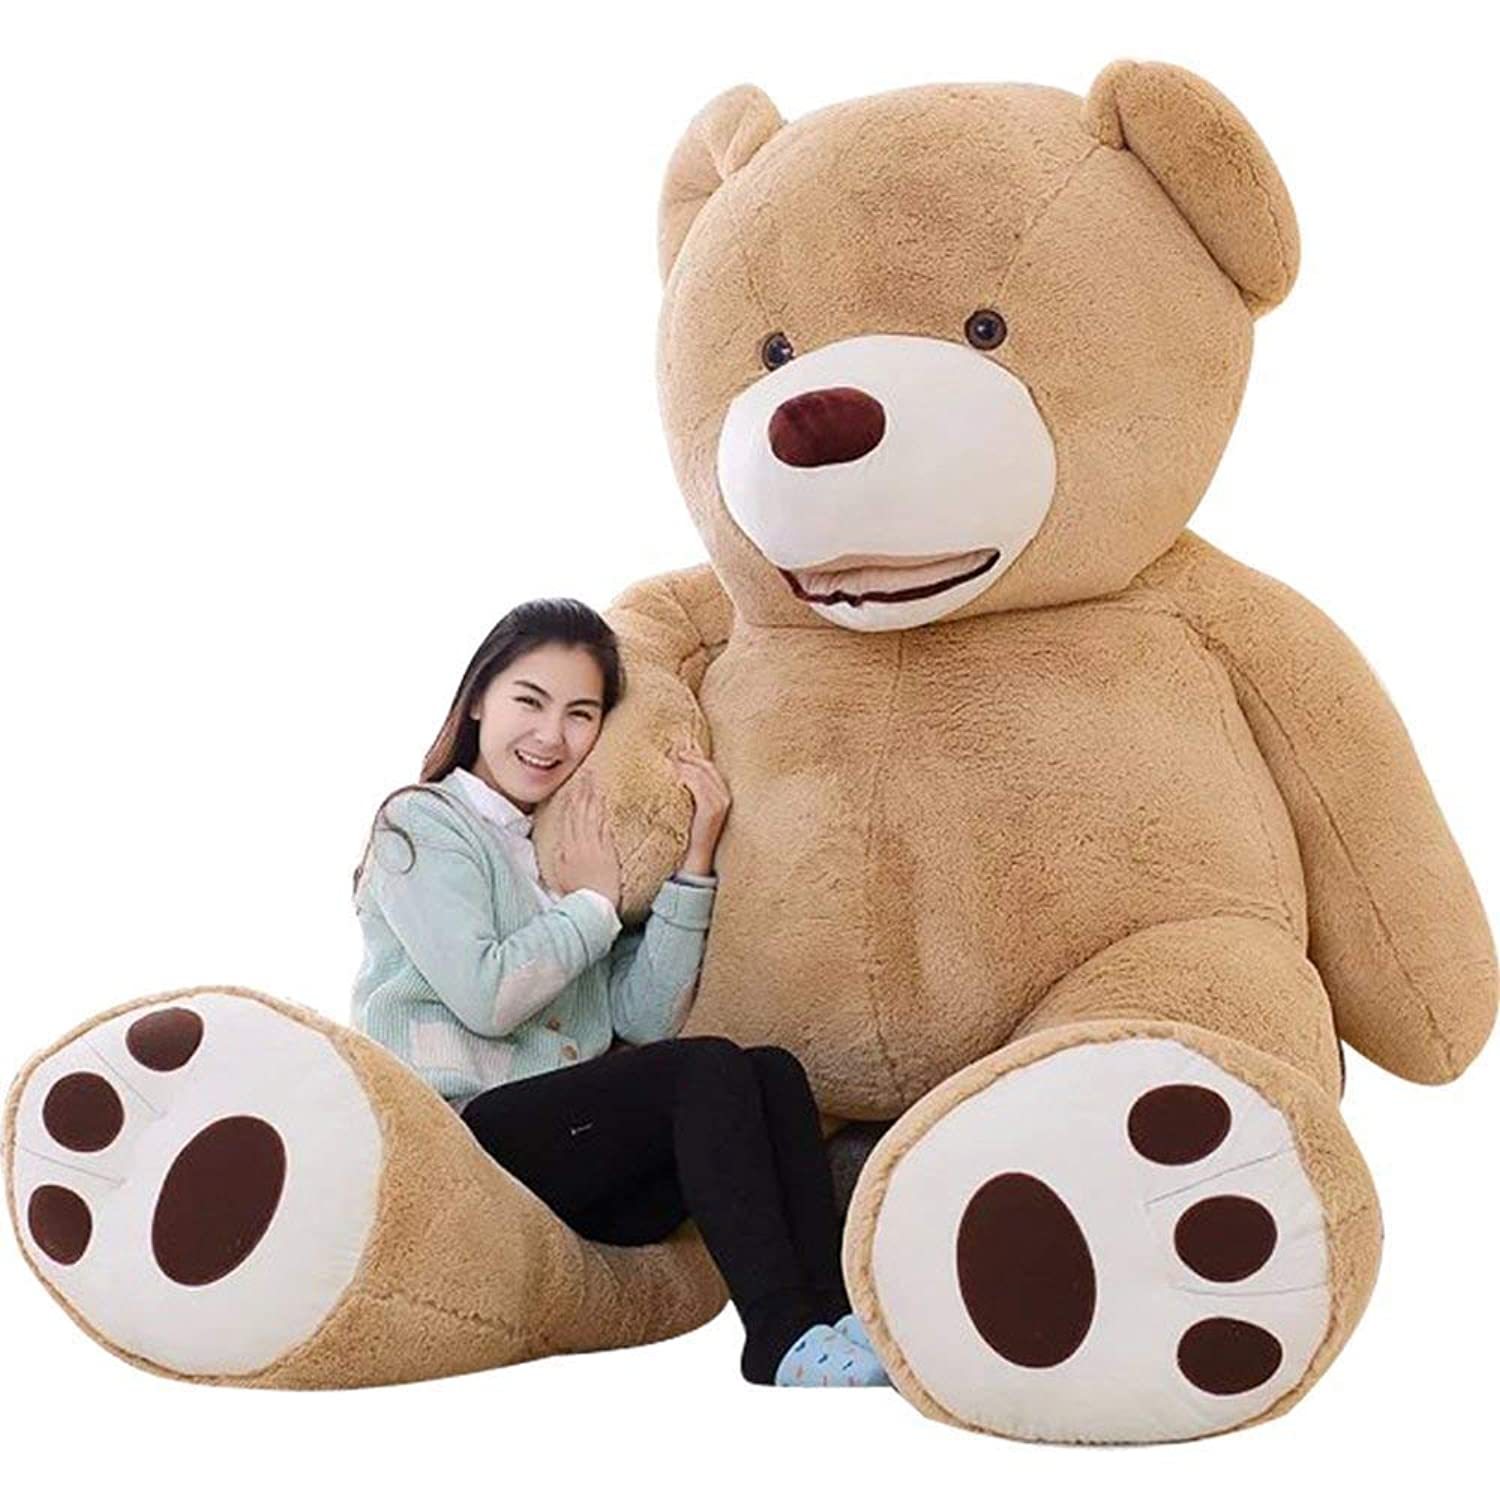 Giant Teddy Bear Plush Toy Stuffed Animals(Brown,78 inches)